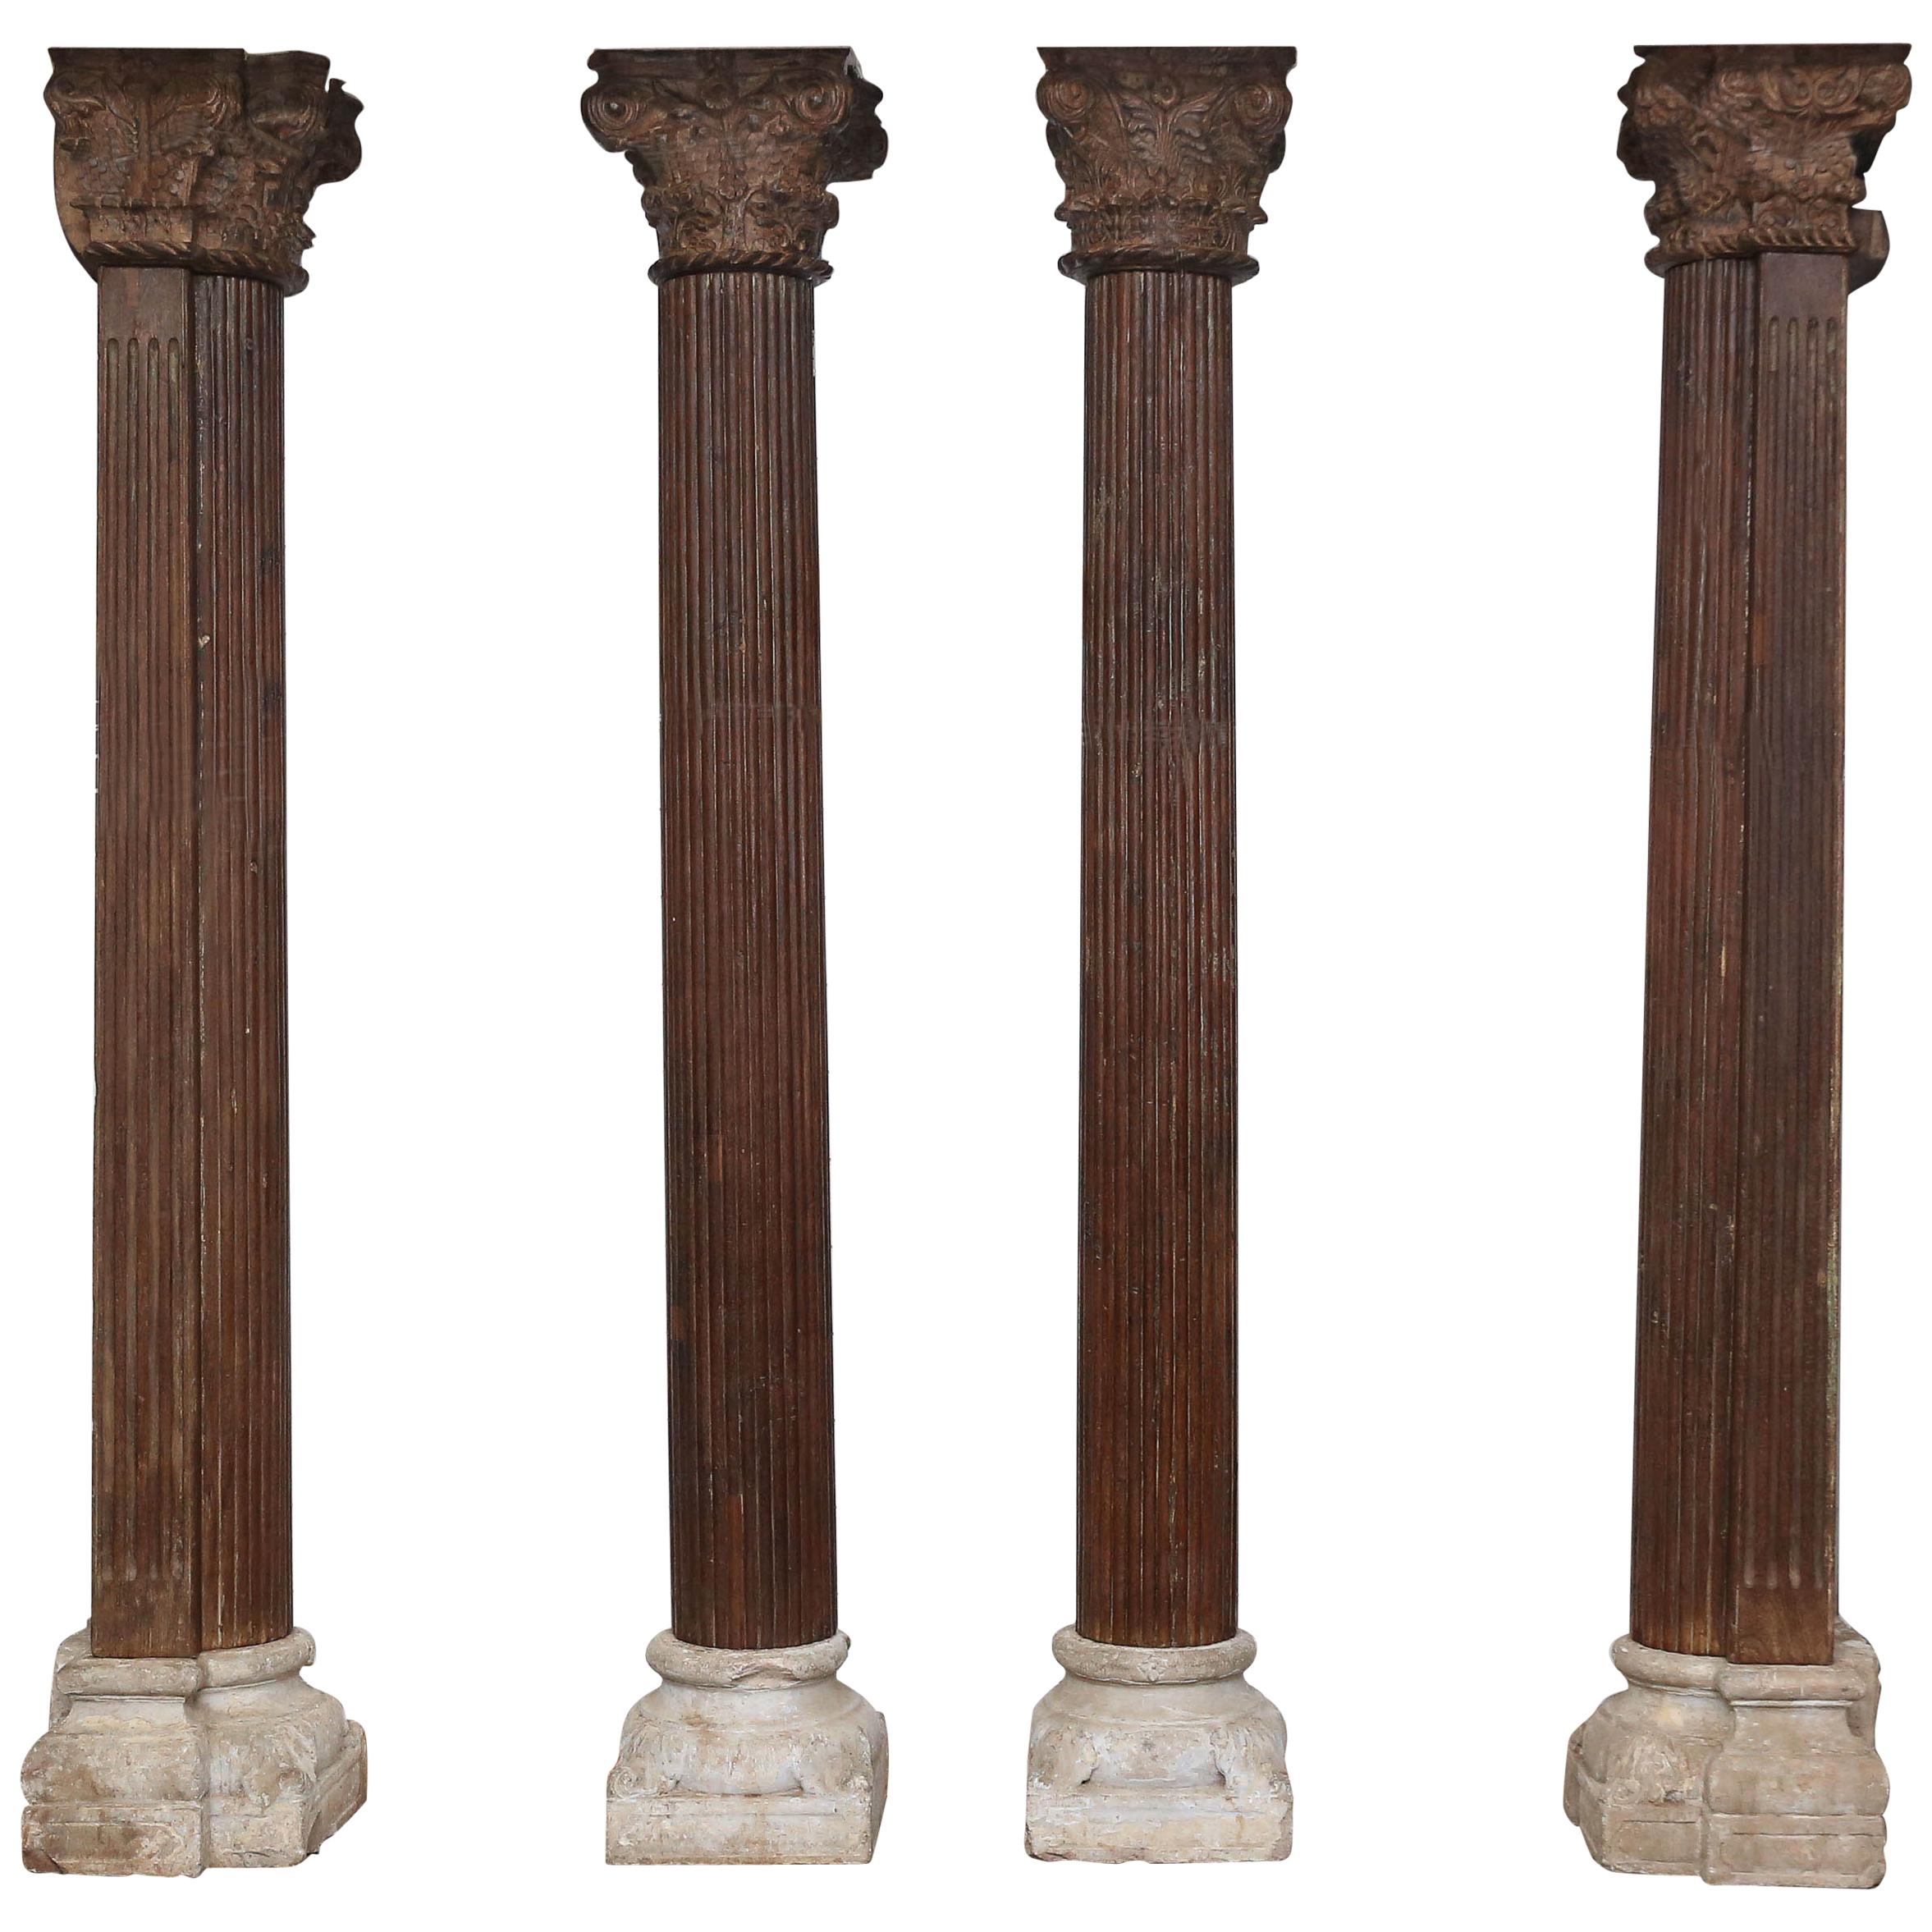 Set of Four 1820s Monumental Load Bearing Columns from an Old Mansion from Goa. For Sale